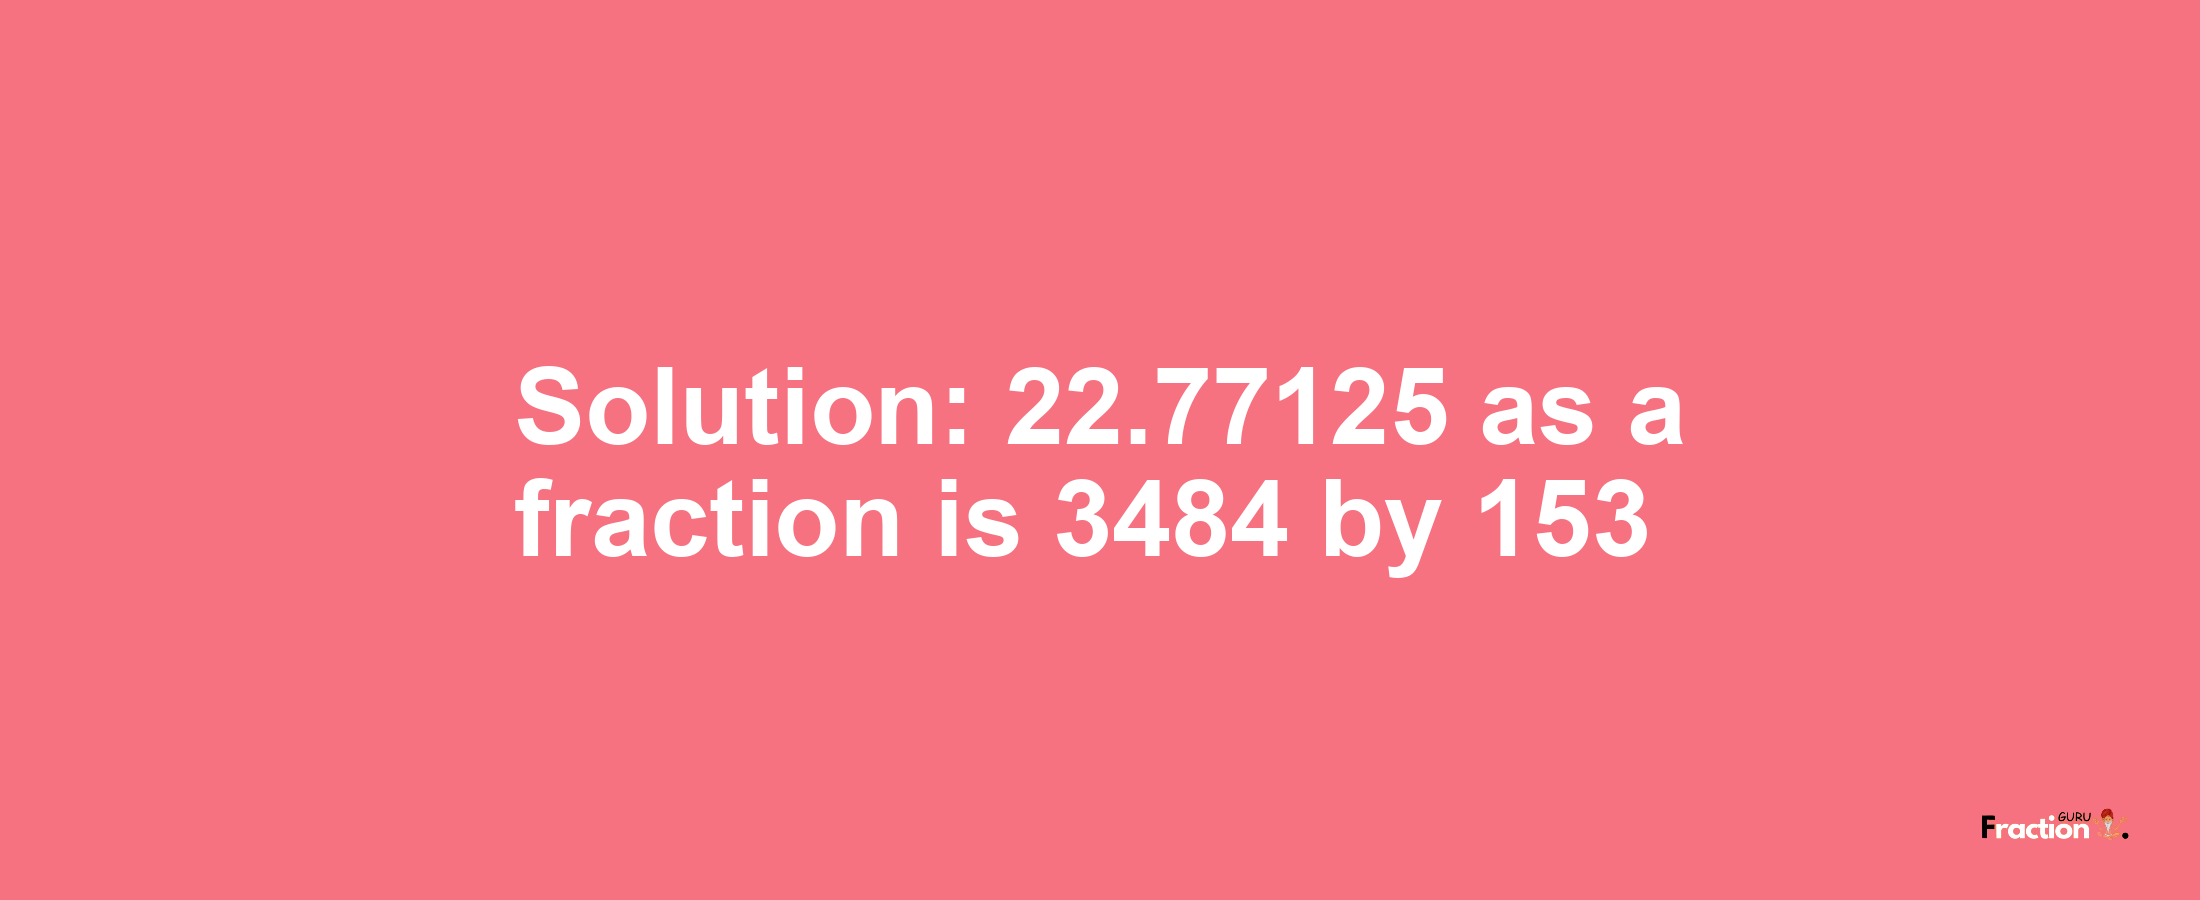 Solution:22.77125 as a fraction is 3484/153